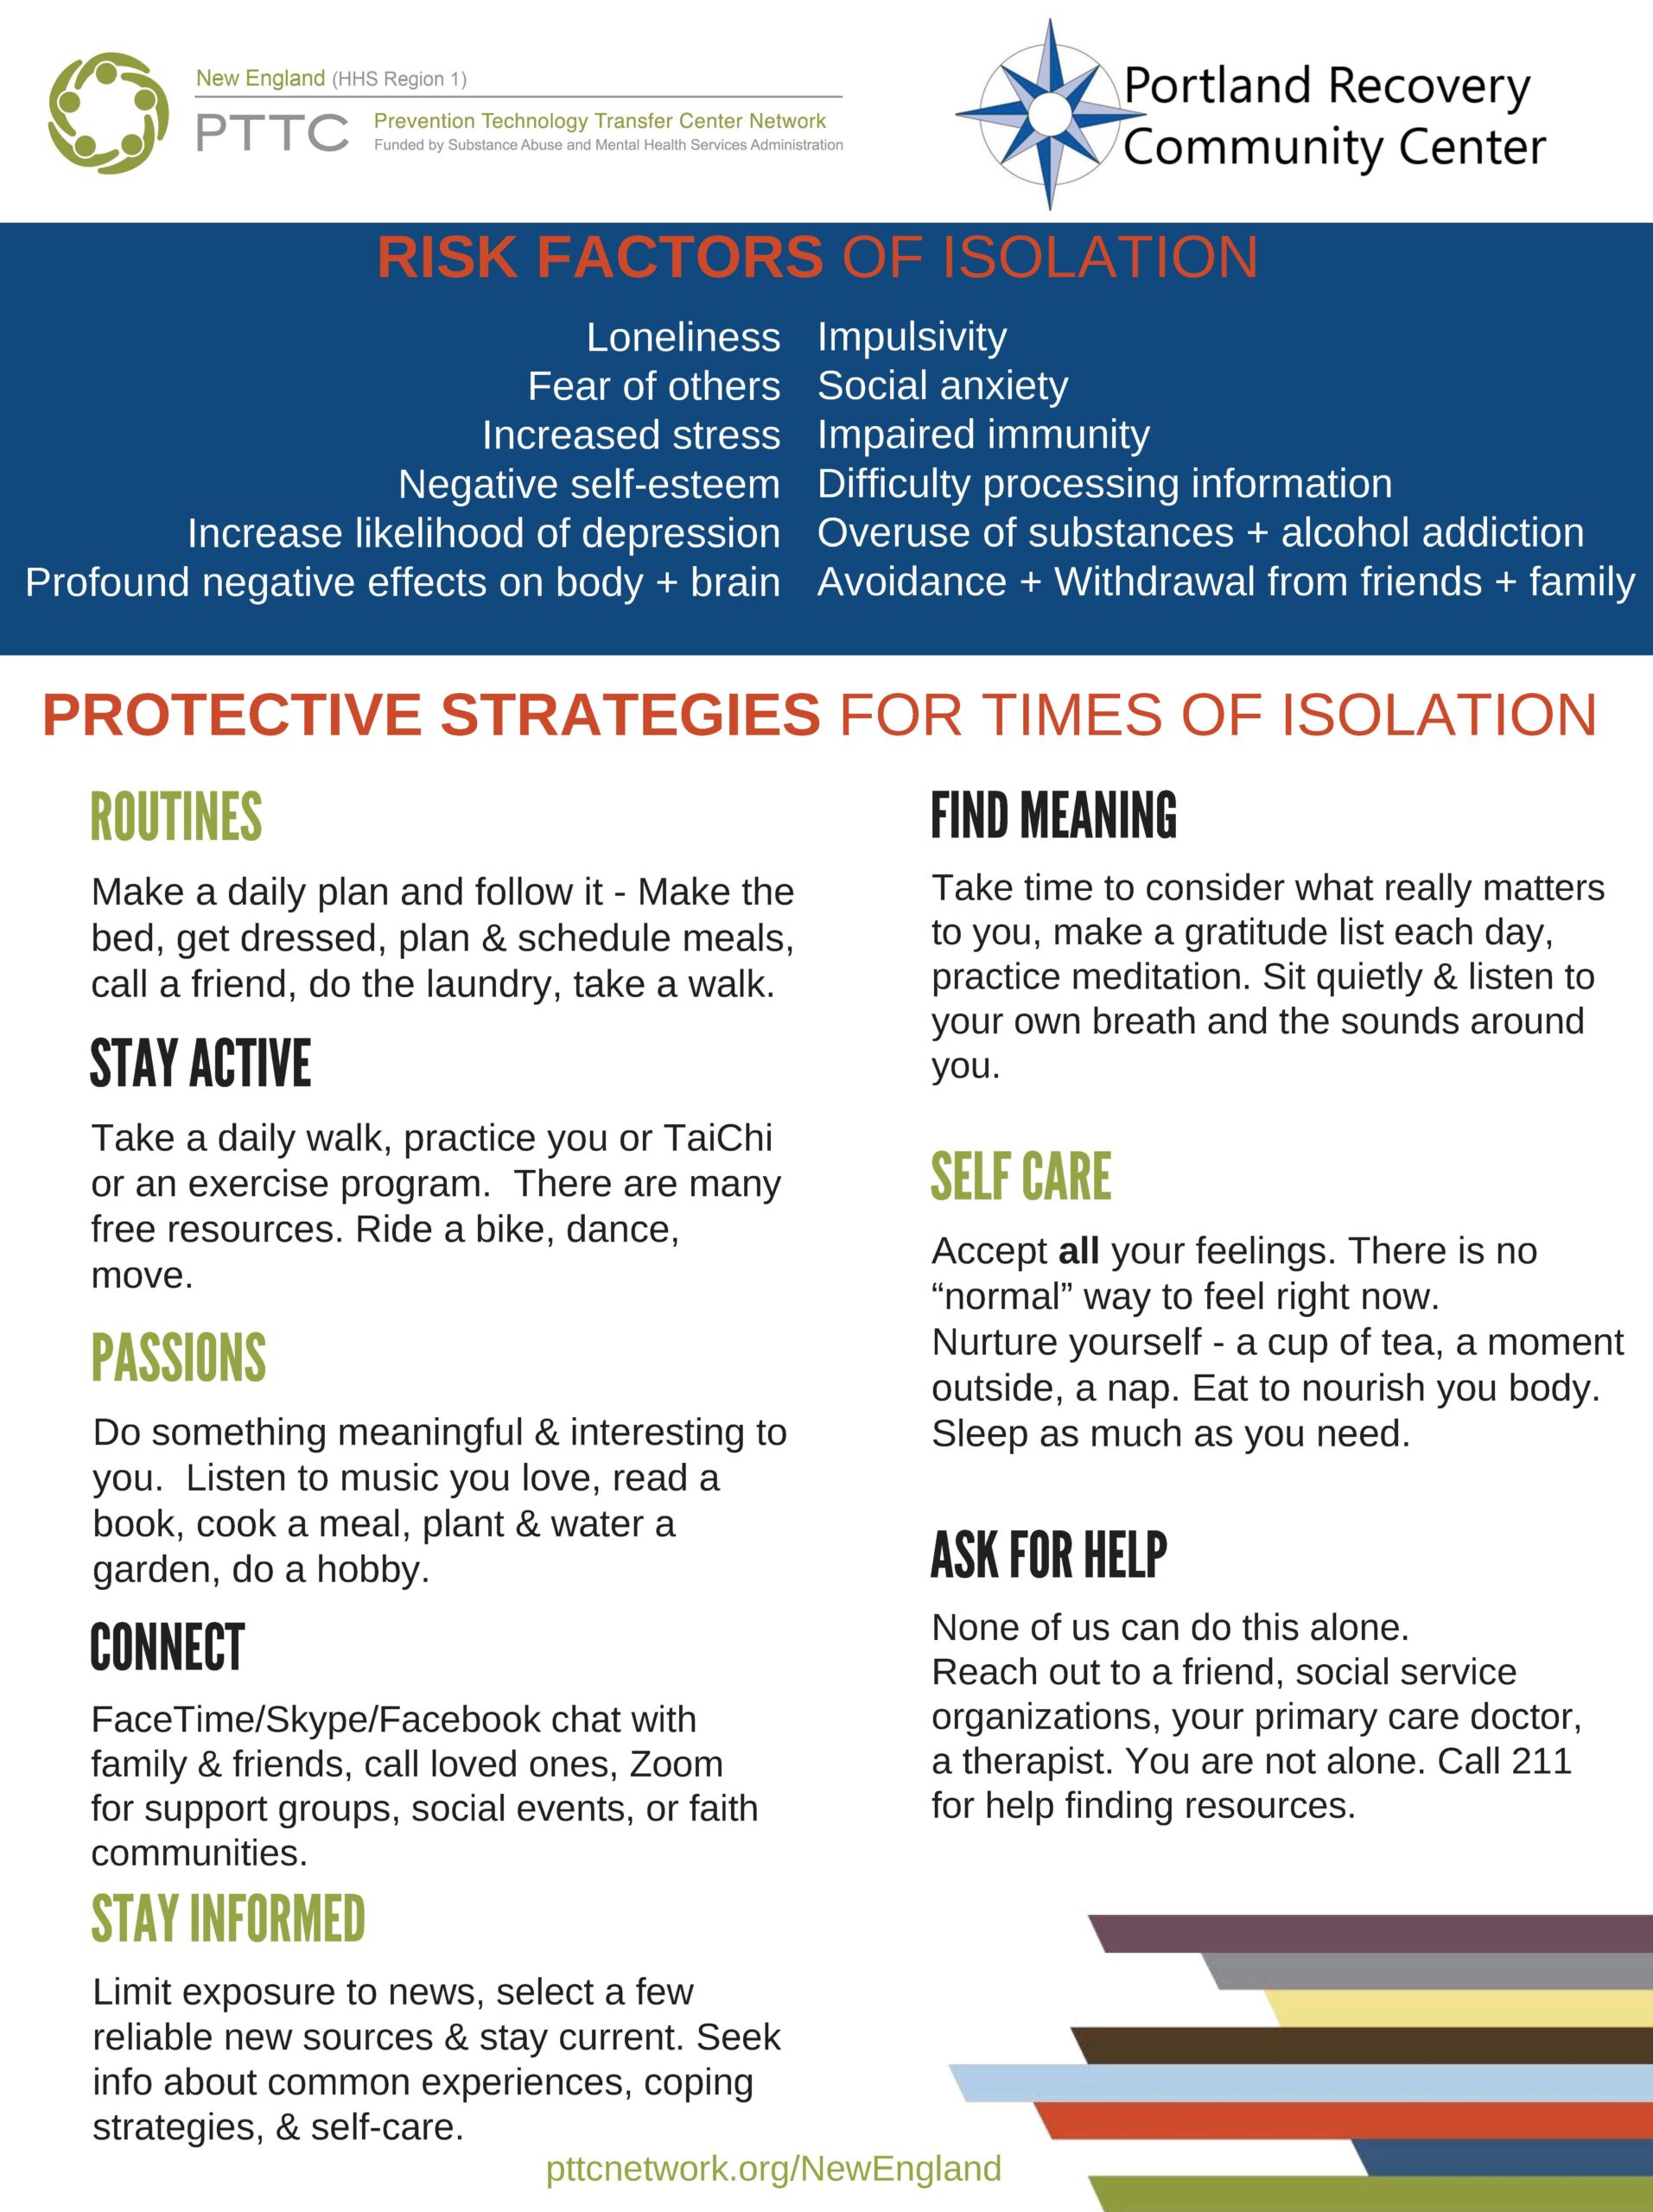 Infographic on risk factors for isolation